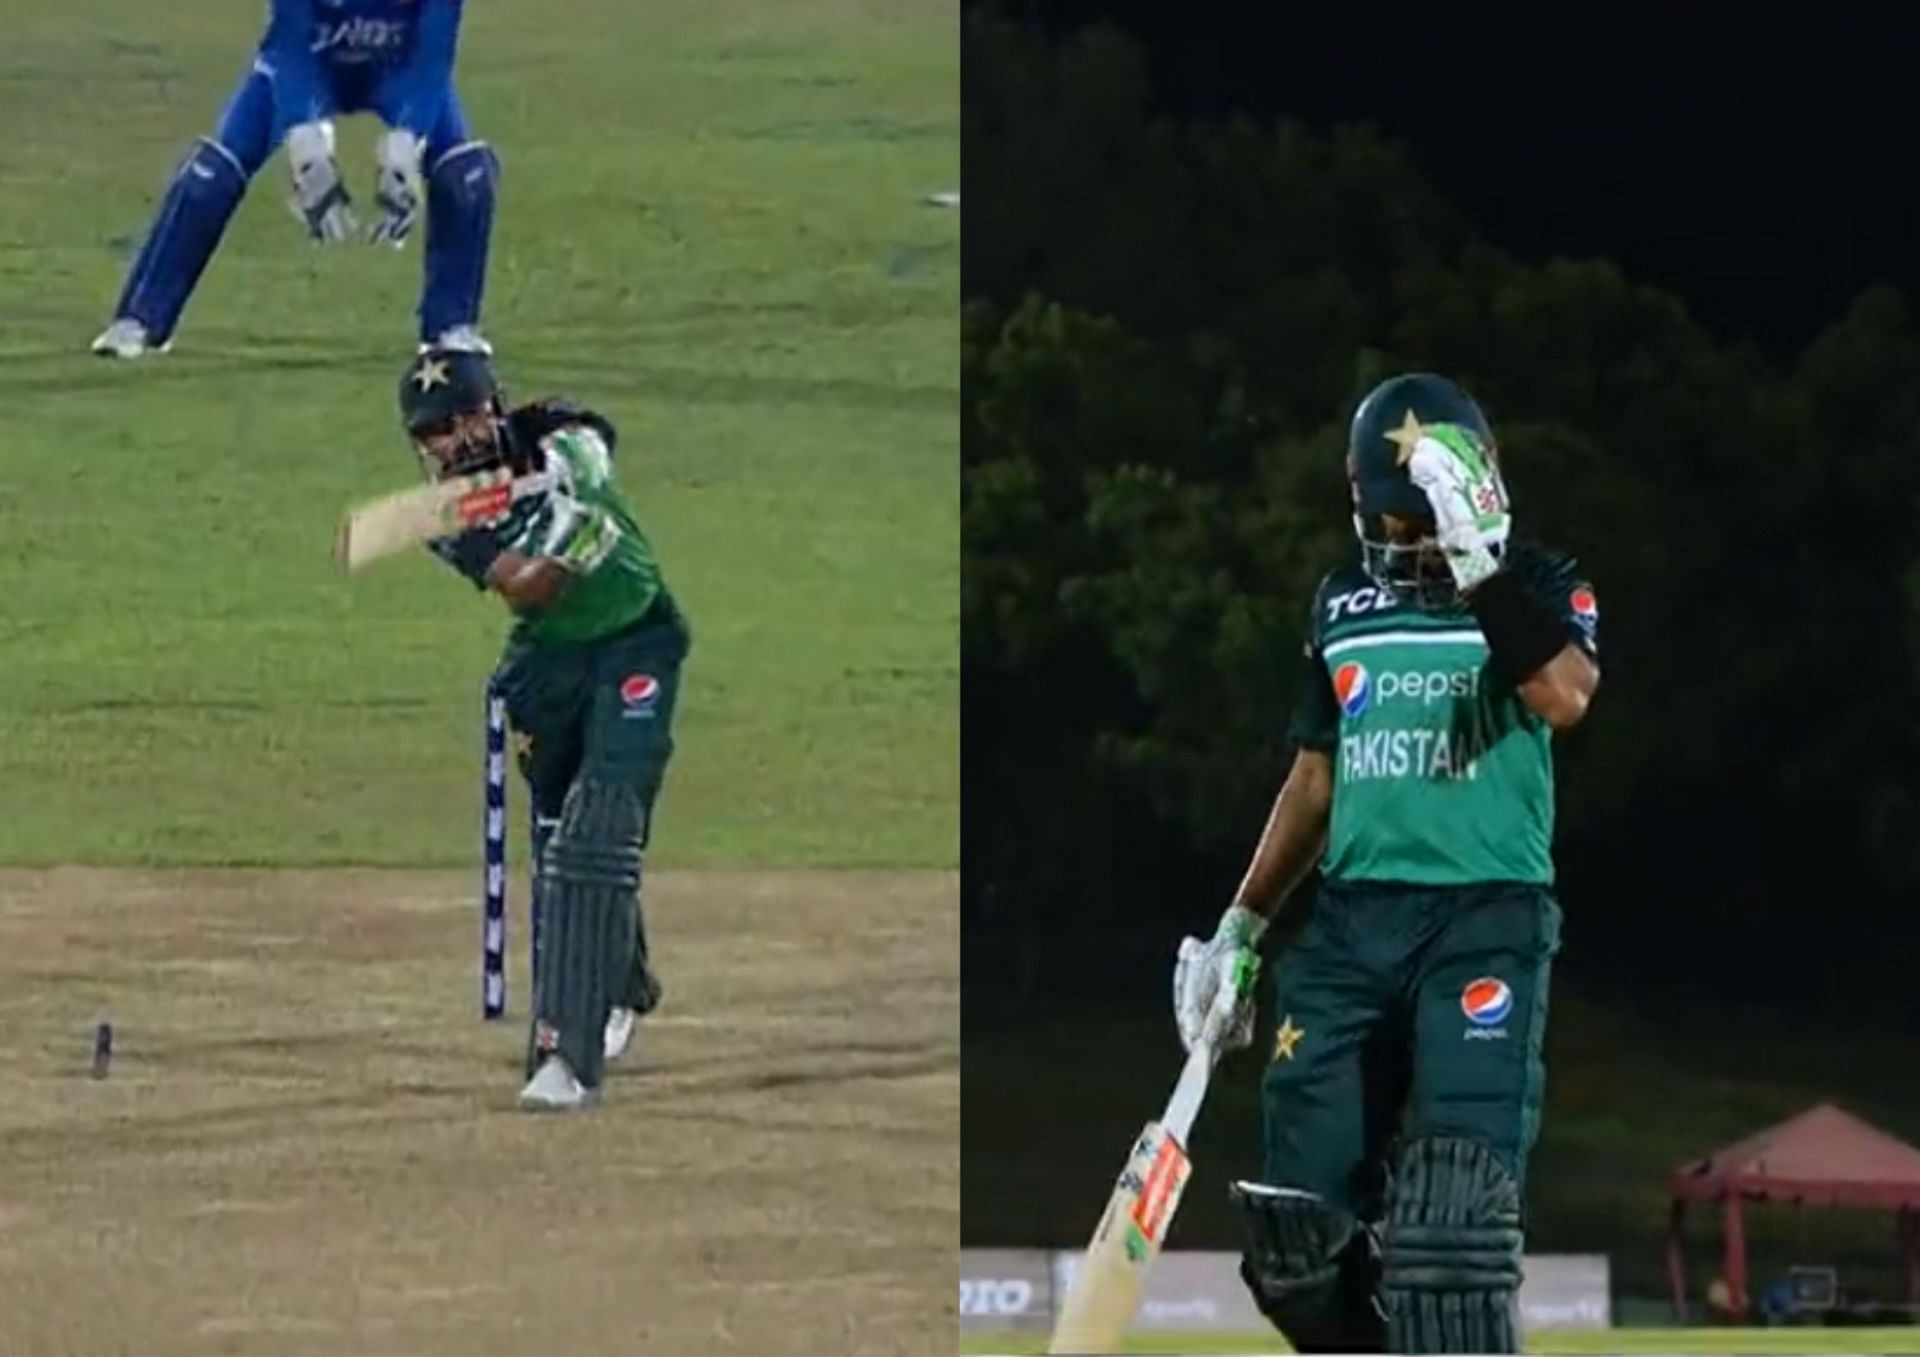 Babar Azam failed to convert his half-century into a big score in the 2nd ODI against Afghanistan (Screengrab via Twitter/Afghanistan Cricket Board).